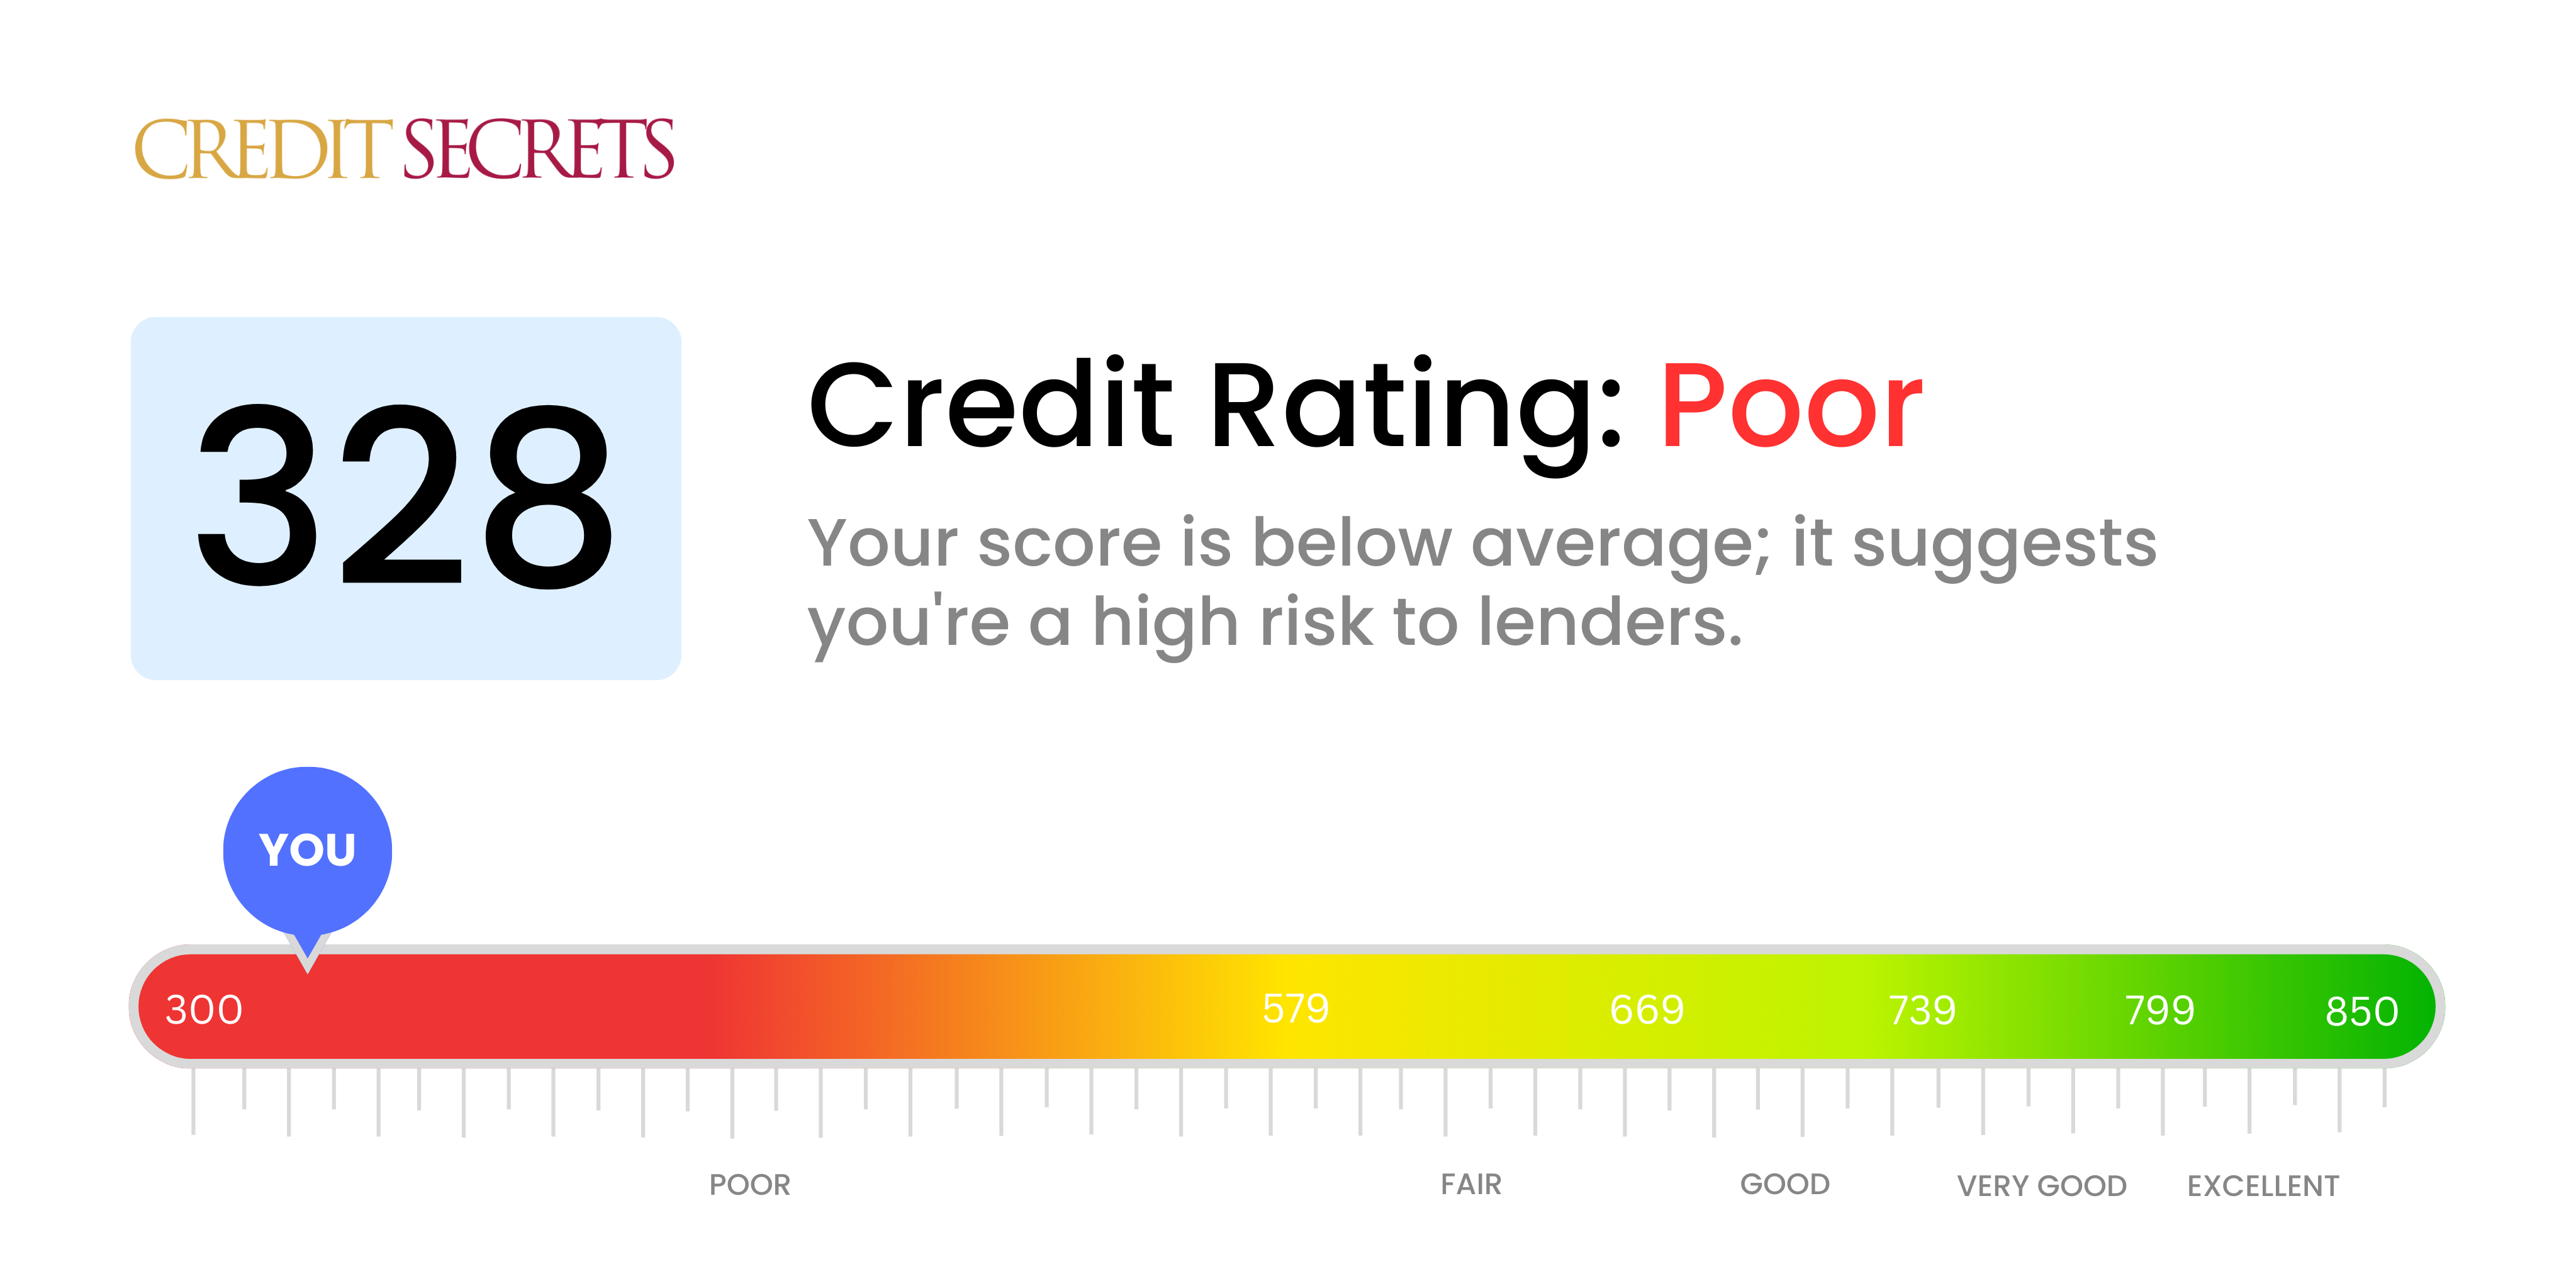 Is 328 a good credit score?